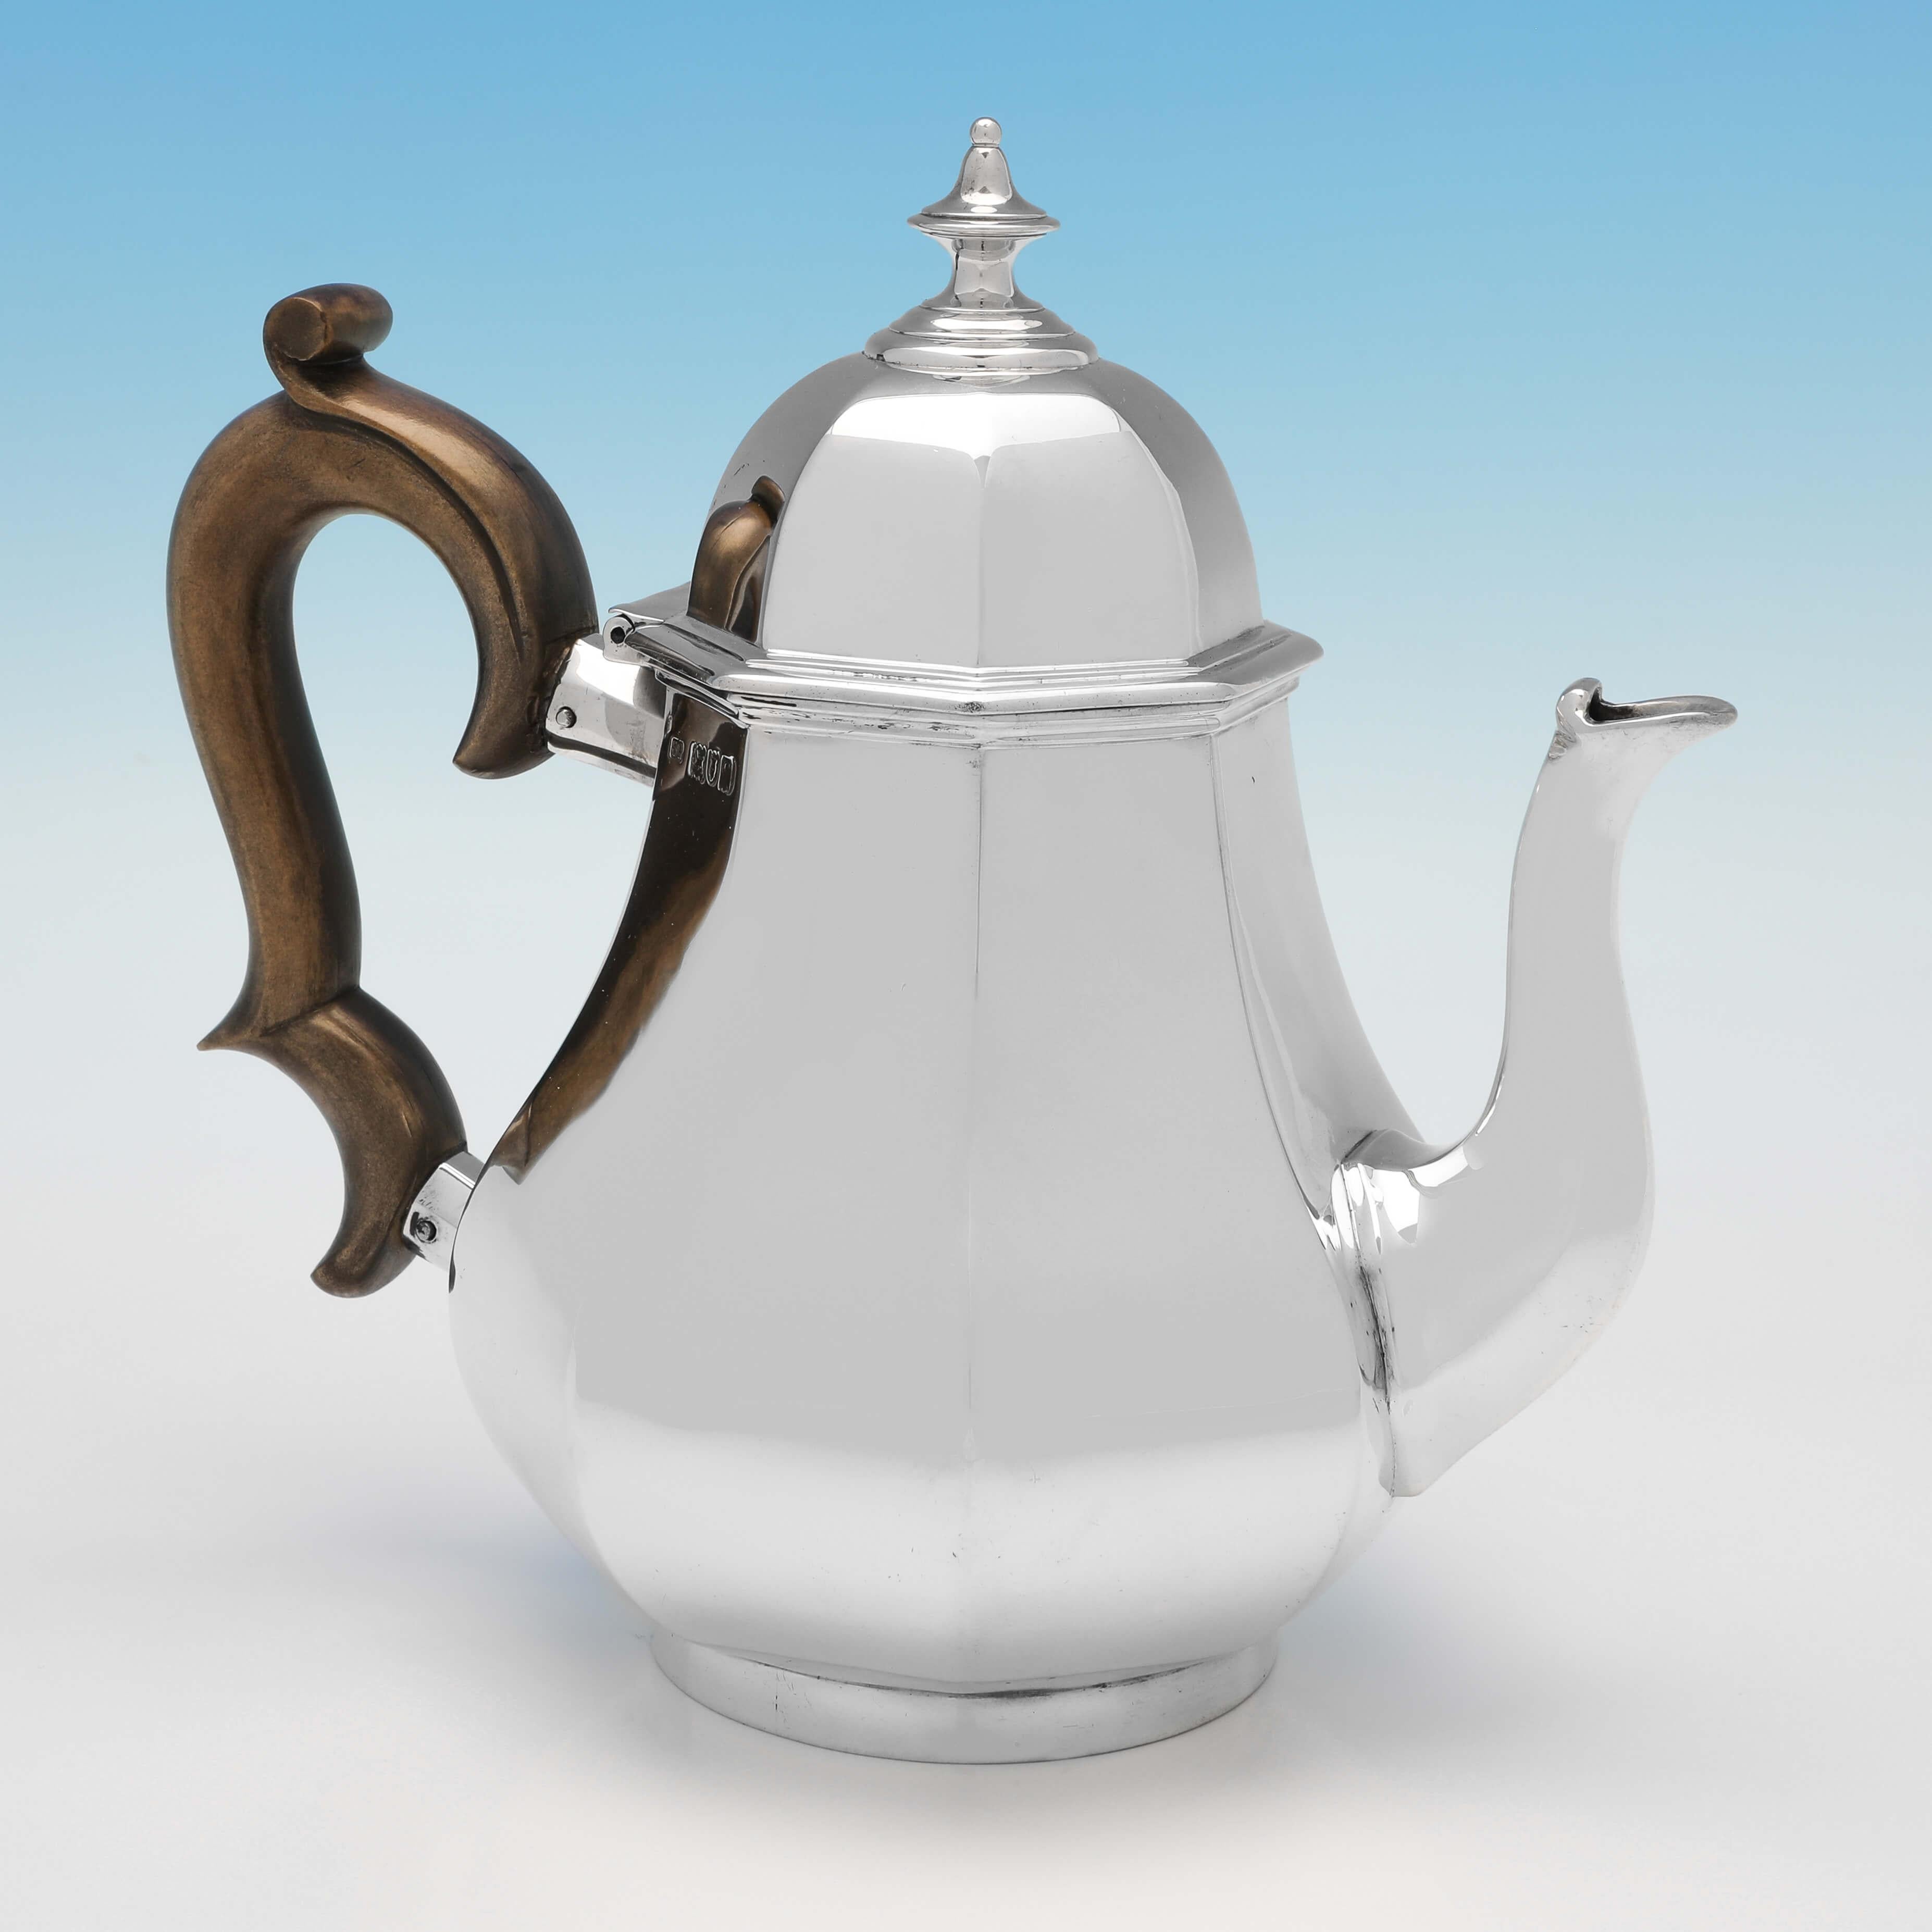 Hallmarked in London in 1911 by Garrard & Co., this handsome, Antique Sterling Silver Teapot, is octagonal in shape and plain in design. The teapot measures 8